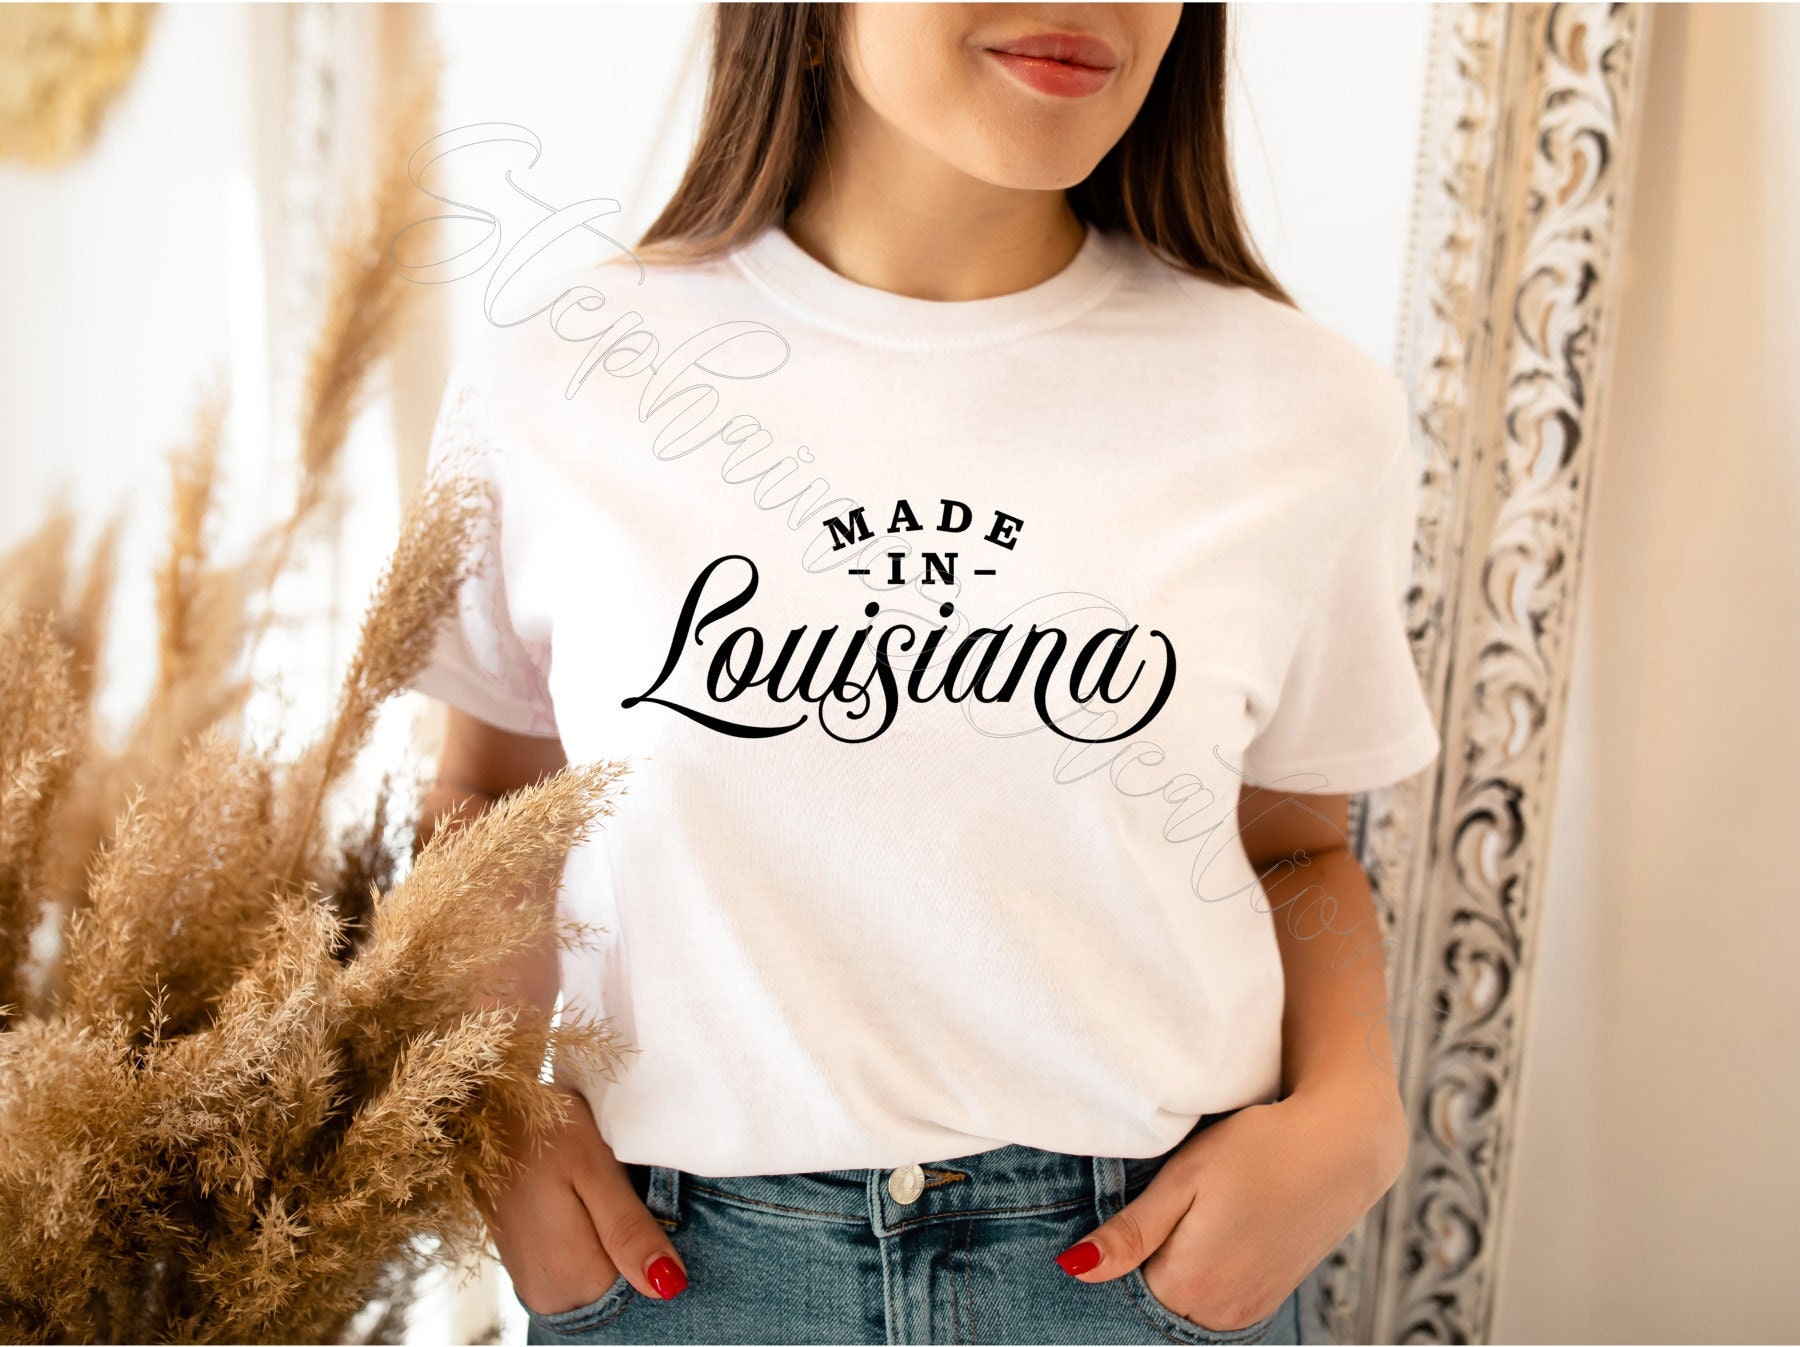 StephainesCreations Just A Louisiana Girl in A Texas World Shirt, Louisiana Girl Shirt, Louisiana Girl in Texas Shirt